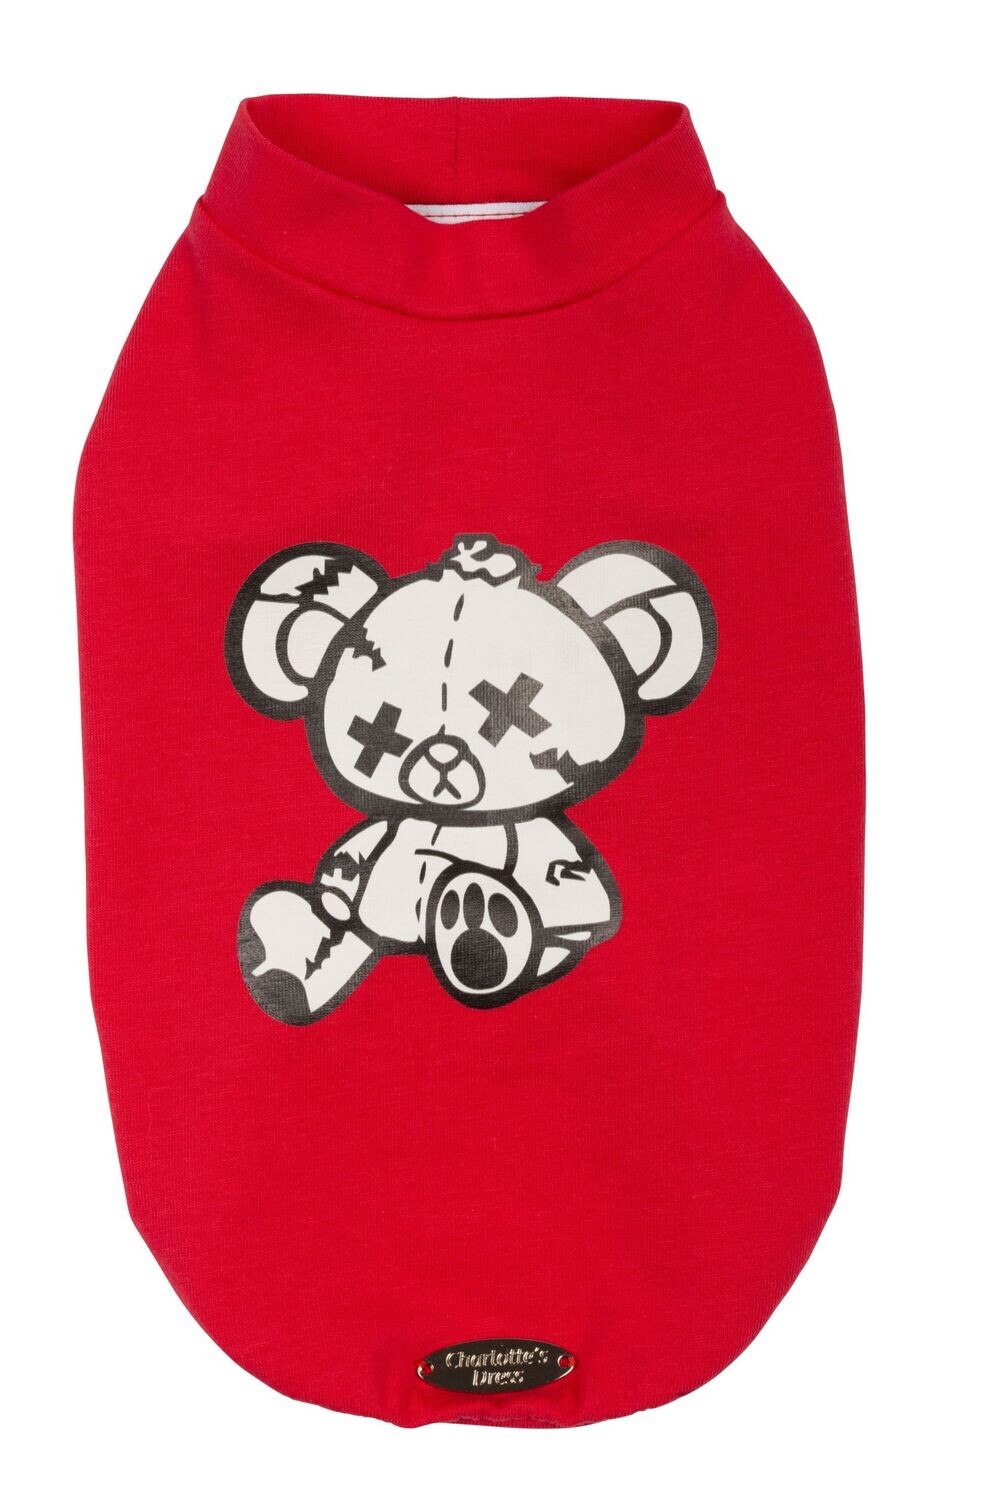 T-Shirt Ted, Farbe: Red